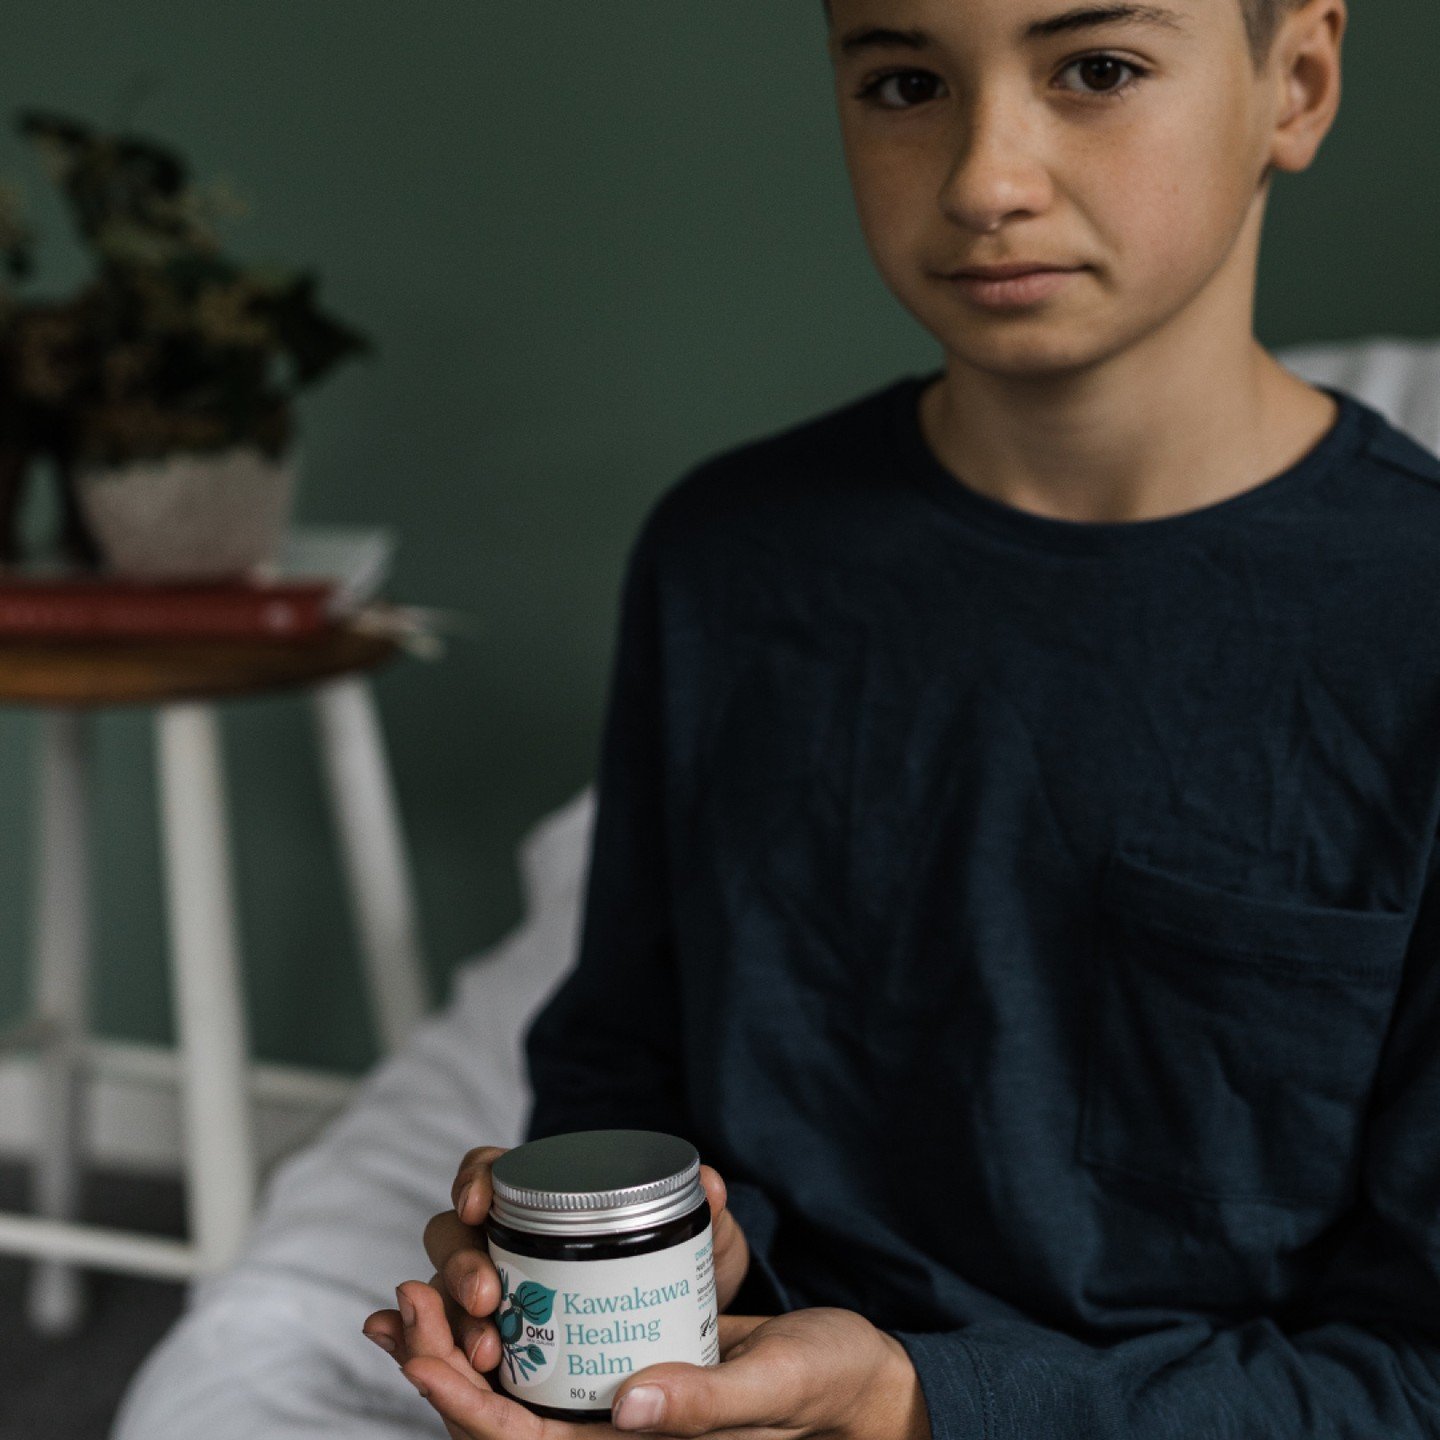 Discover the gentle touch of nature, perfect for kids and sensitive skin!

Our premium blend of NZ Herbs Kawakawa &amp; Houhere, Calendula Flower &amp; NZ Hemp Seed Oils is crafted with love and care. Enhanced with the soothing power of German Chamom